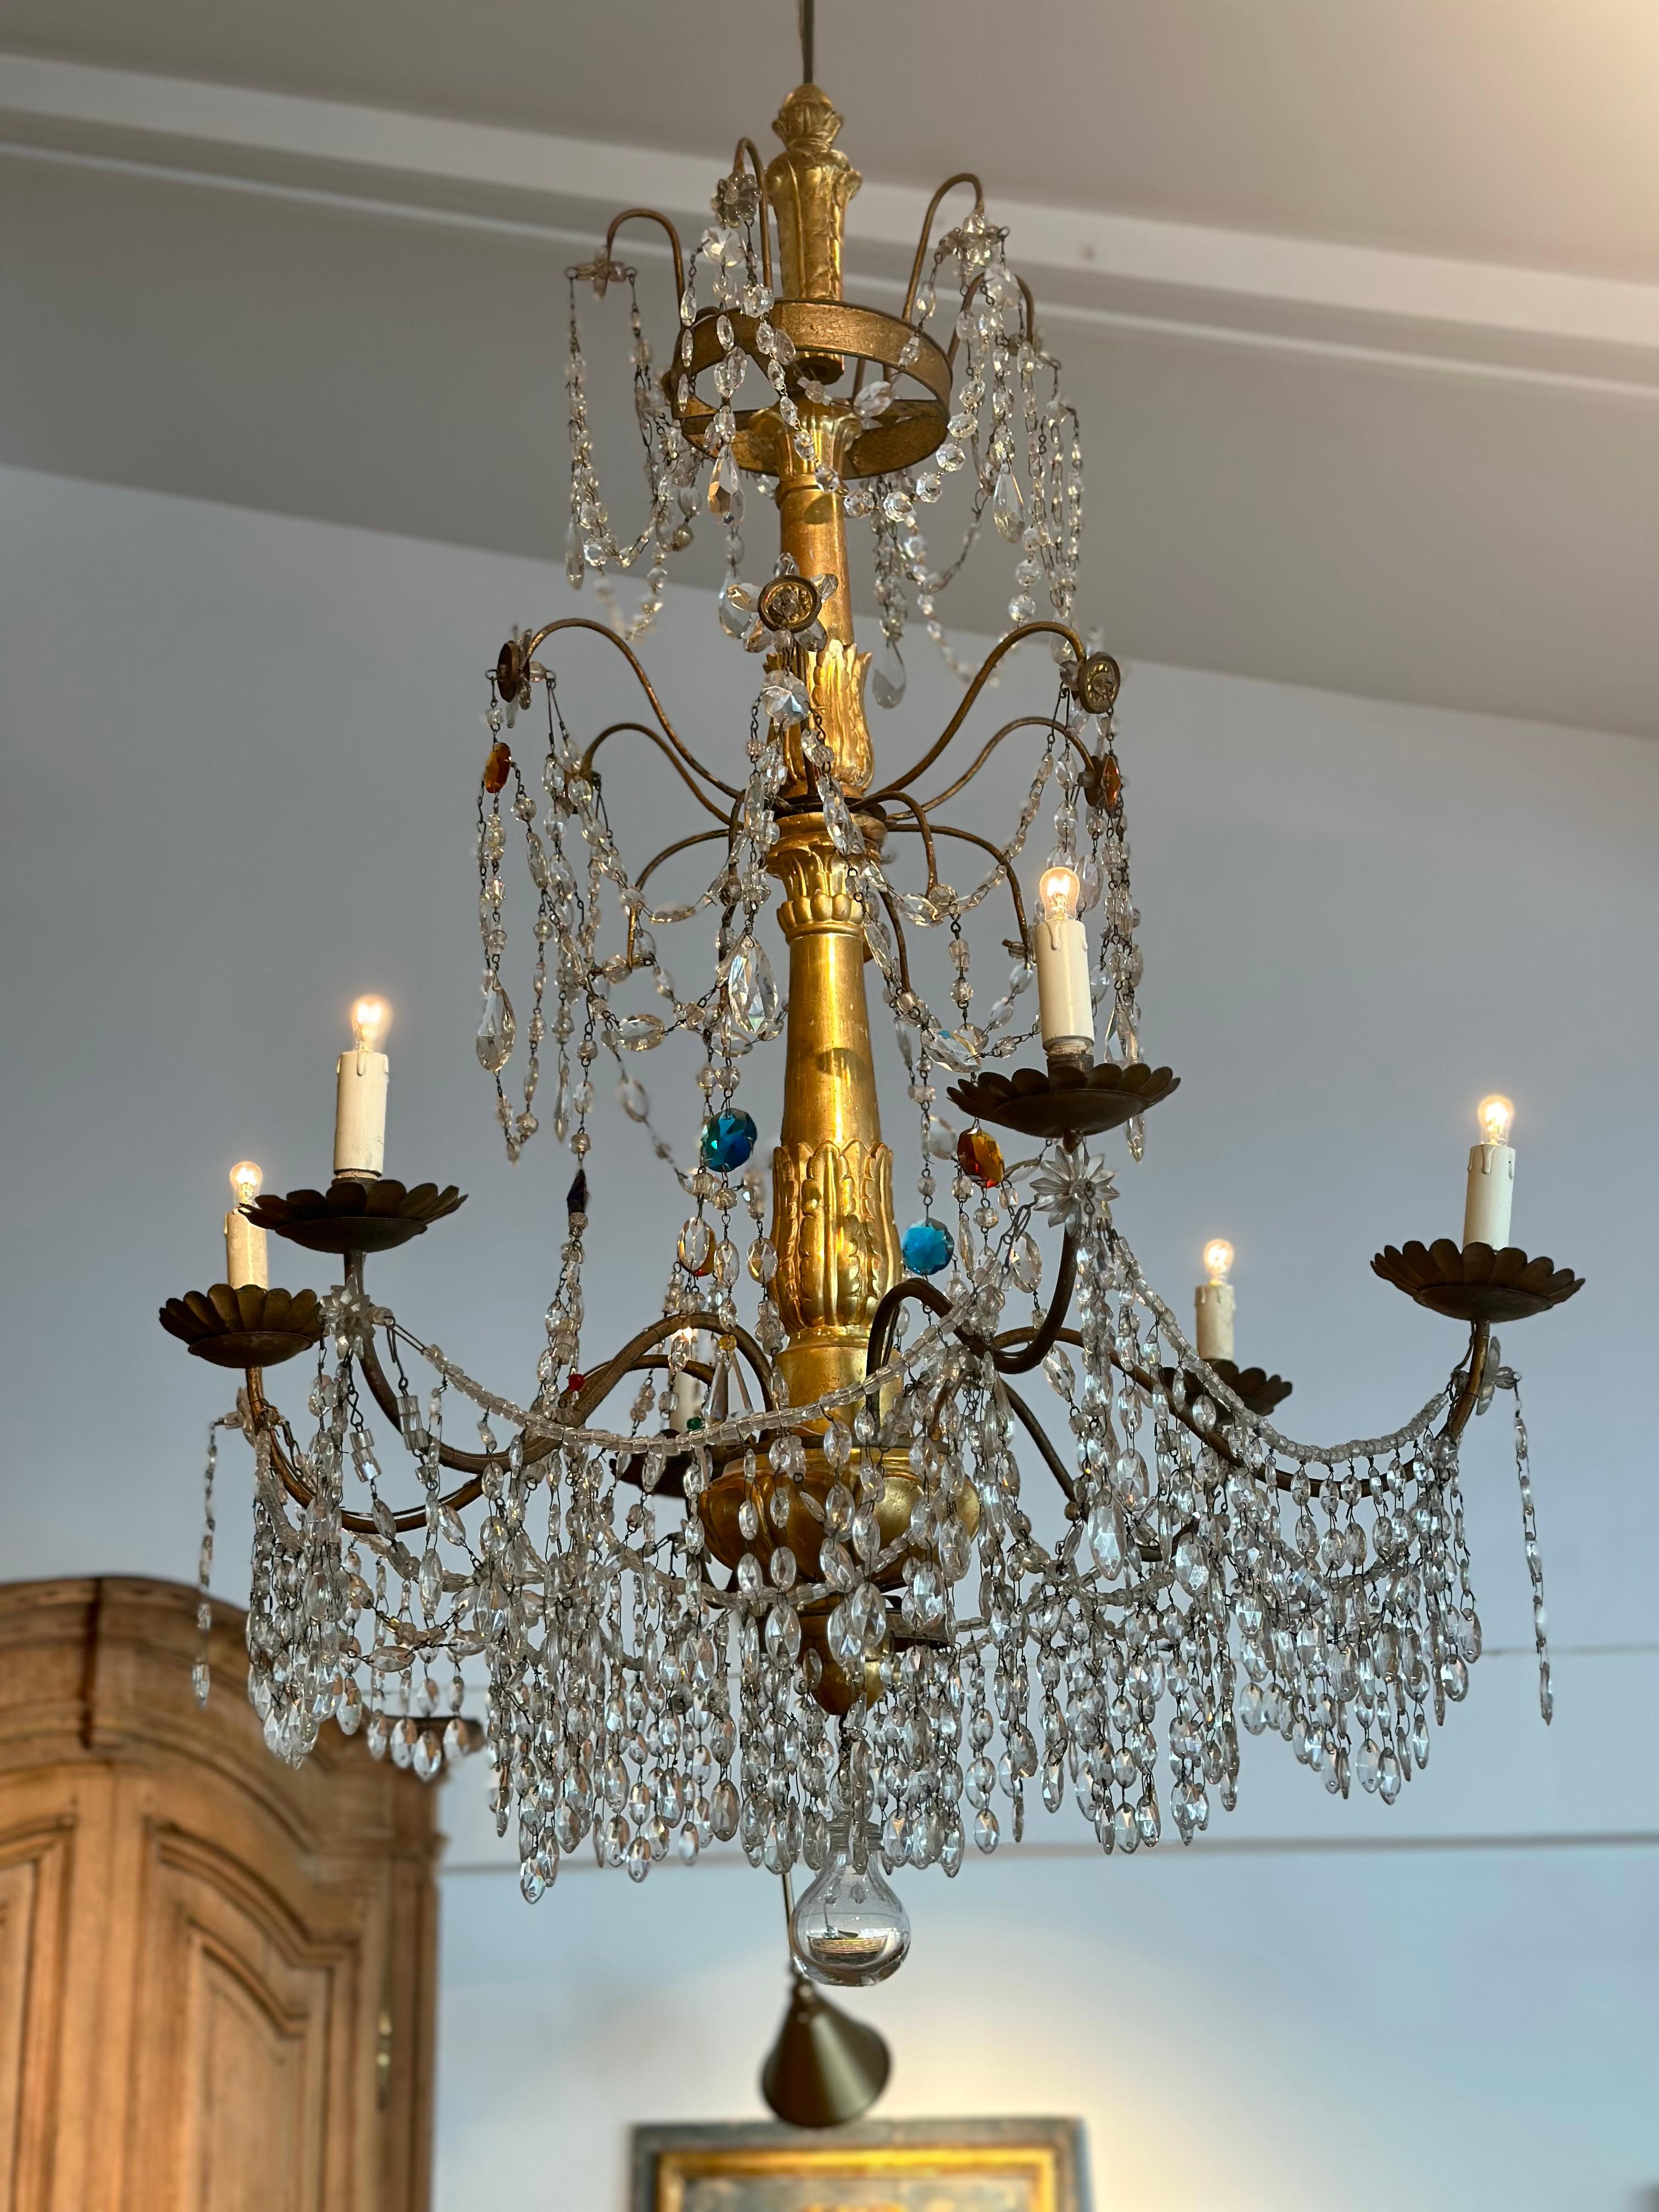 Hand-Carved  Important Late 18th c  Genovese Chandelier  For Sale